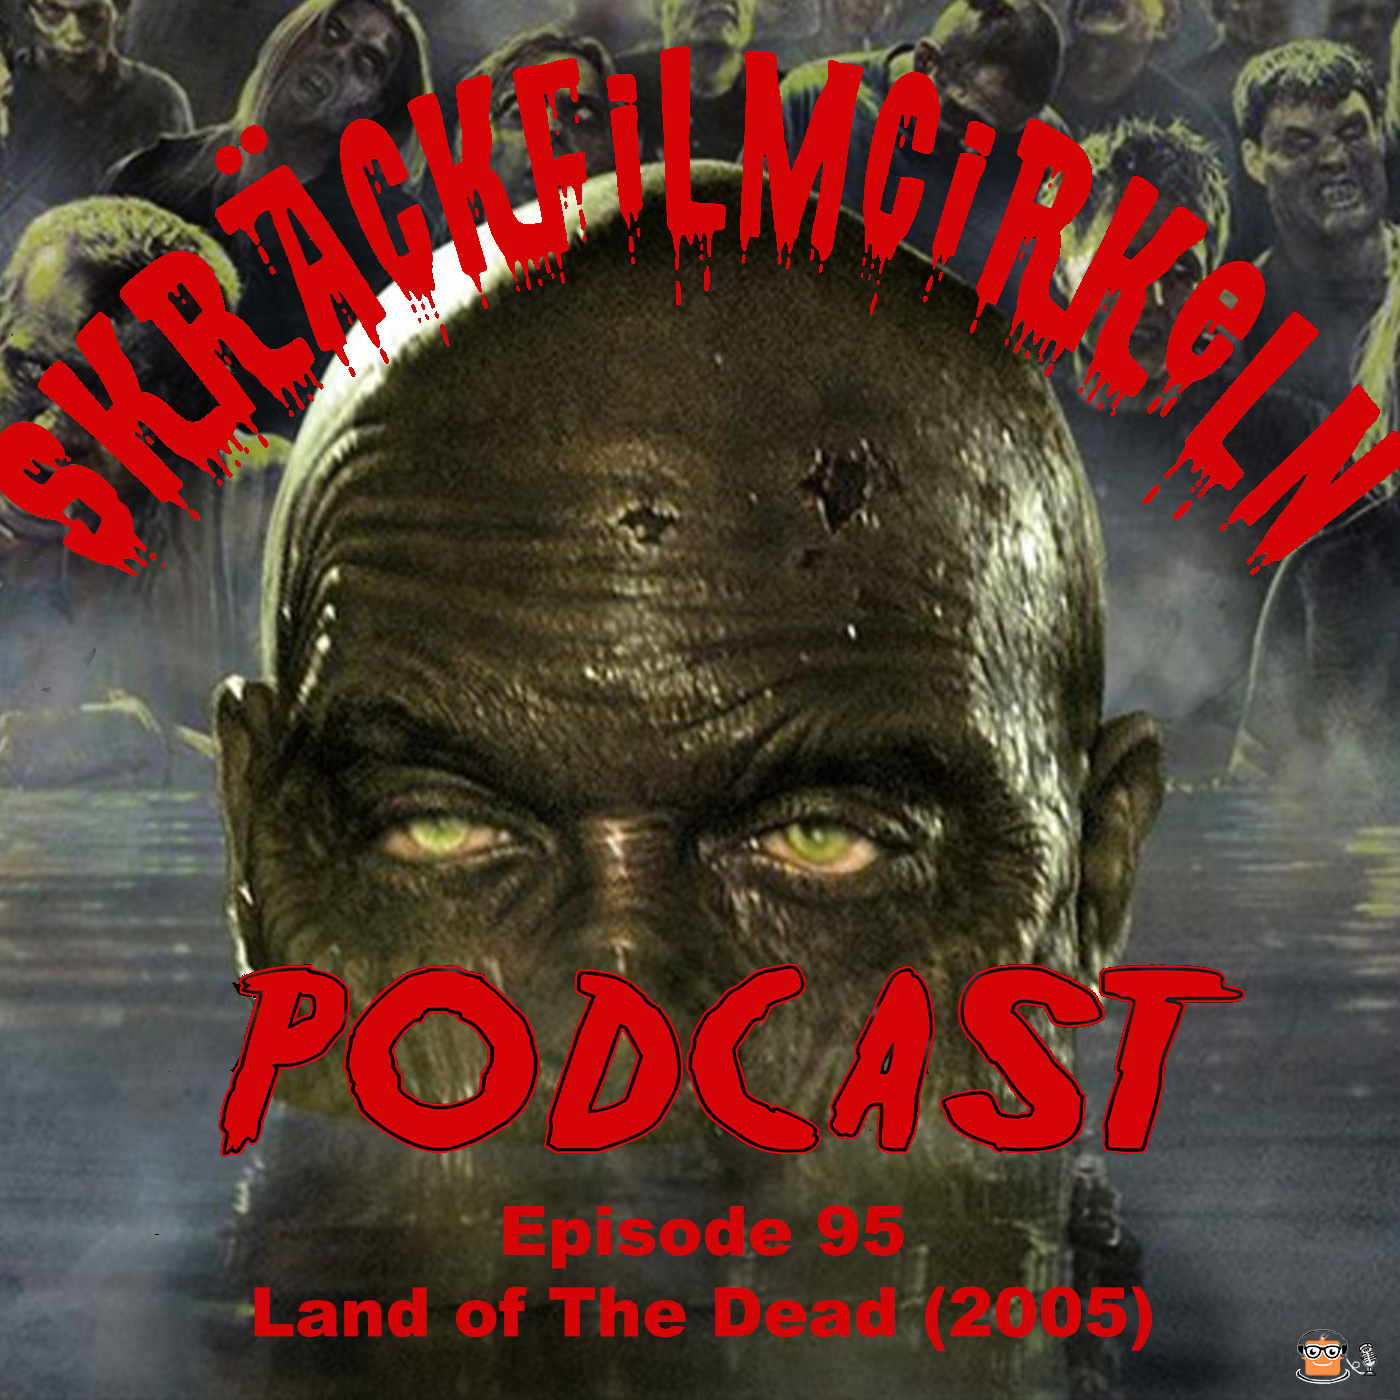 Episode 95 – Land Of The Dead (2005)